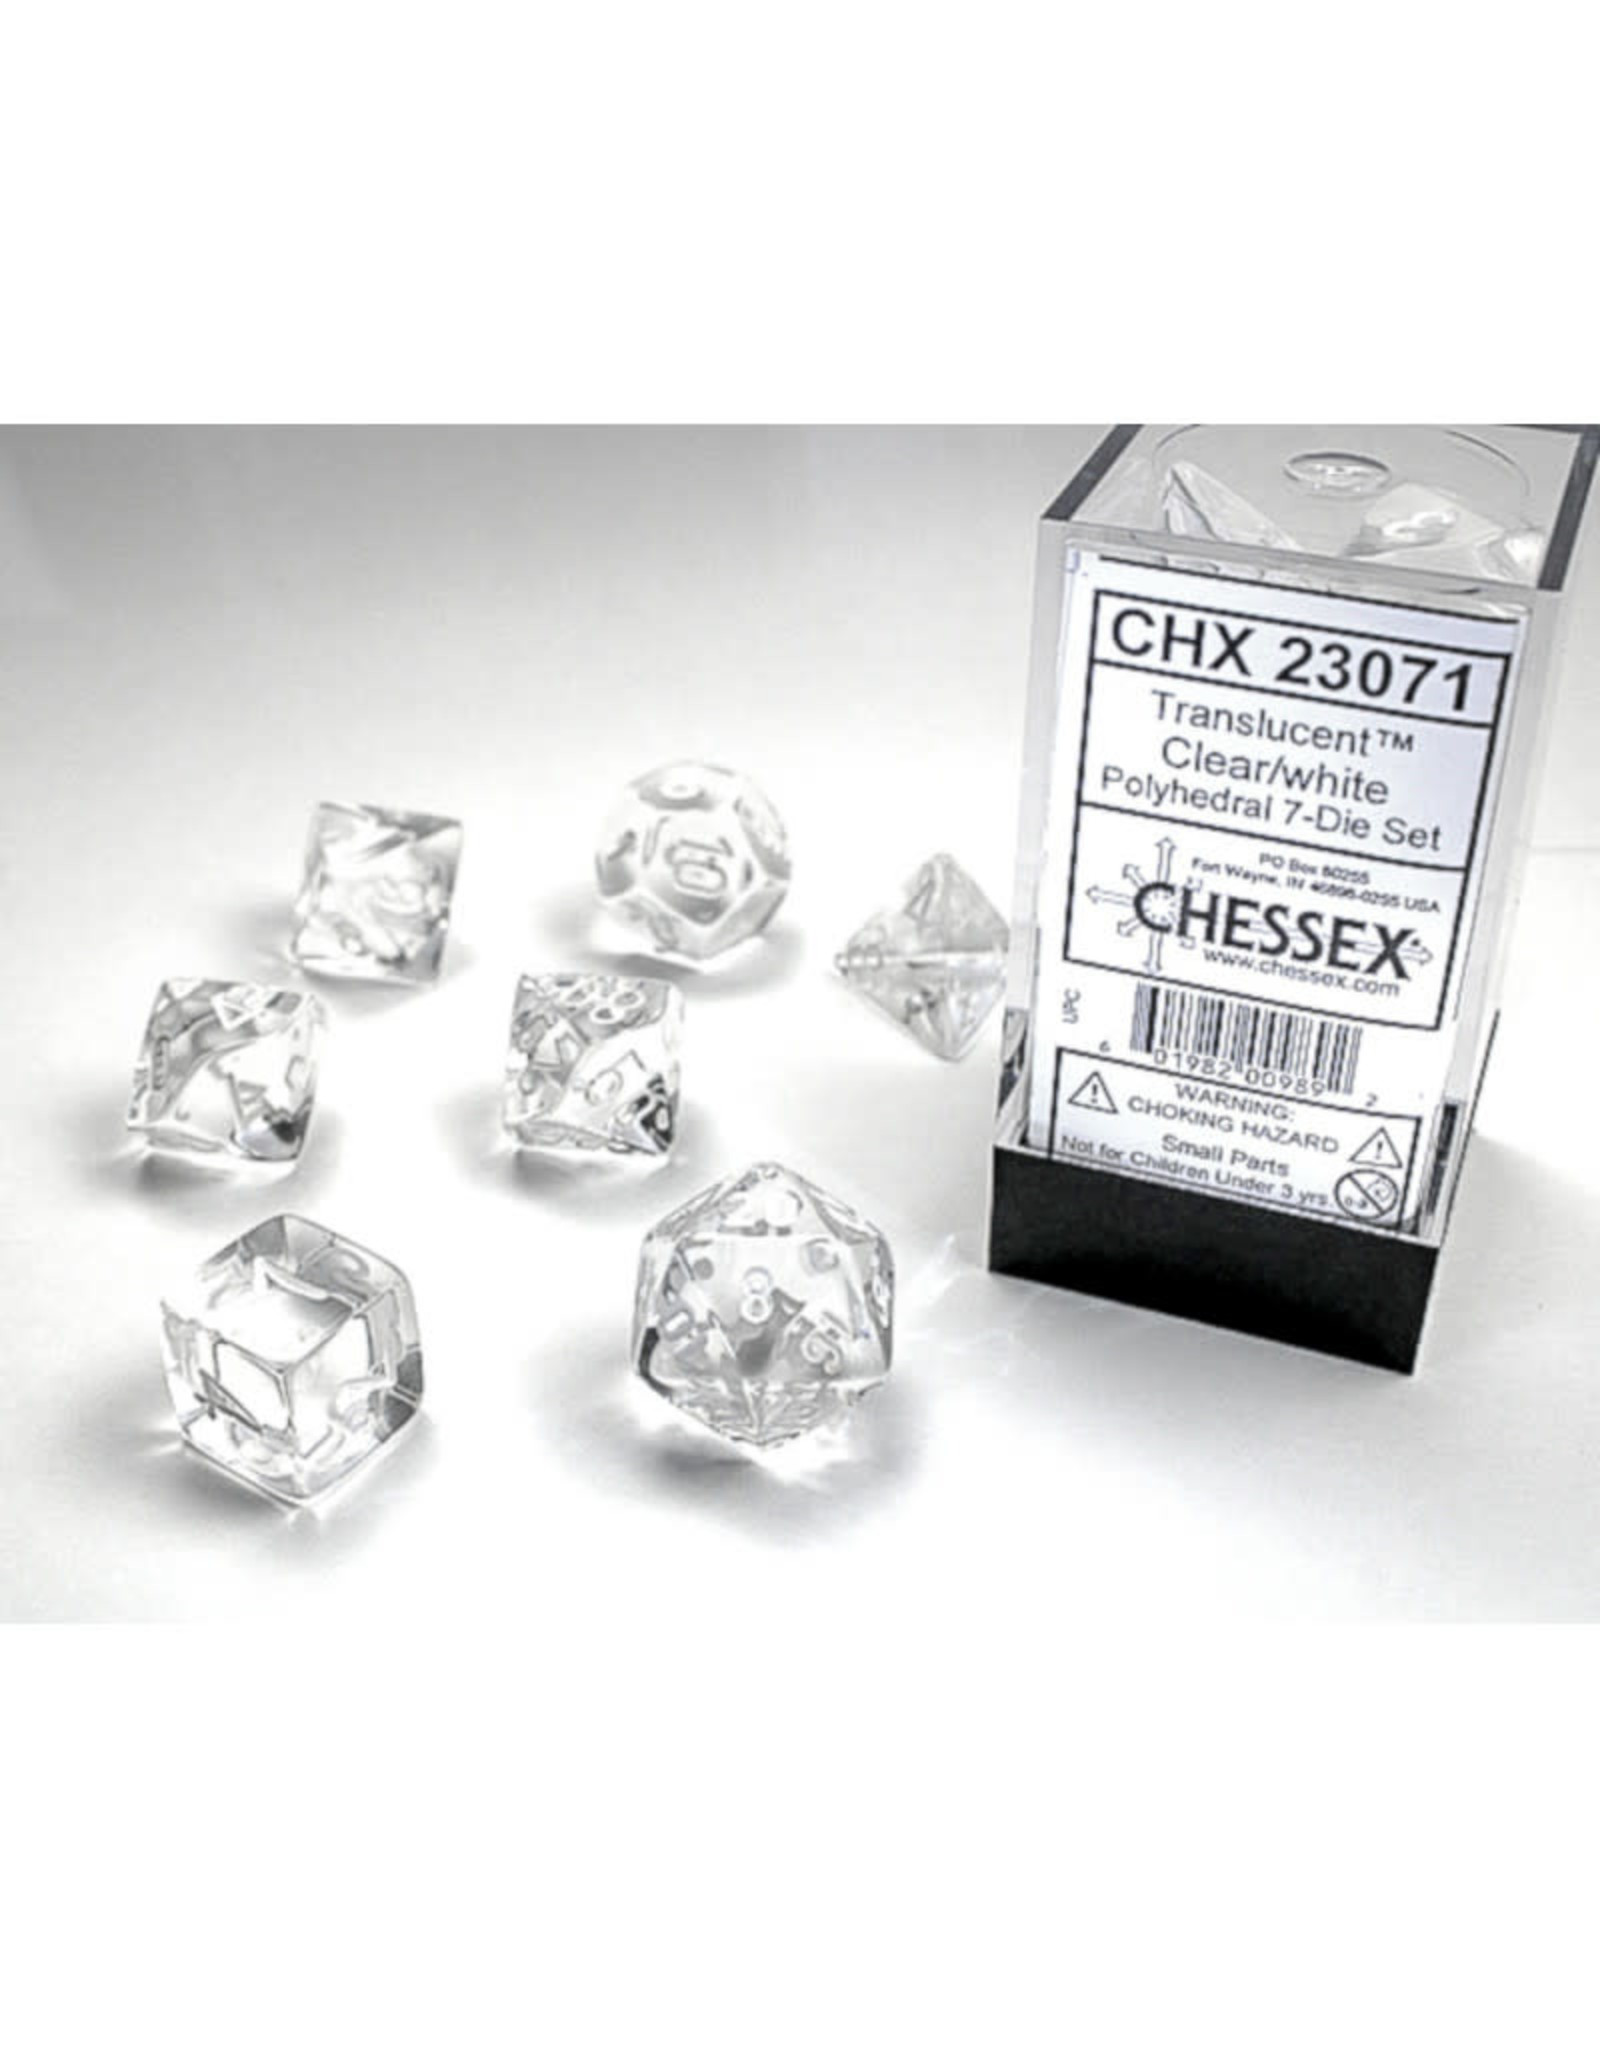 Chessex Polyhedral Dice Set (7) Translucent Clear